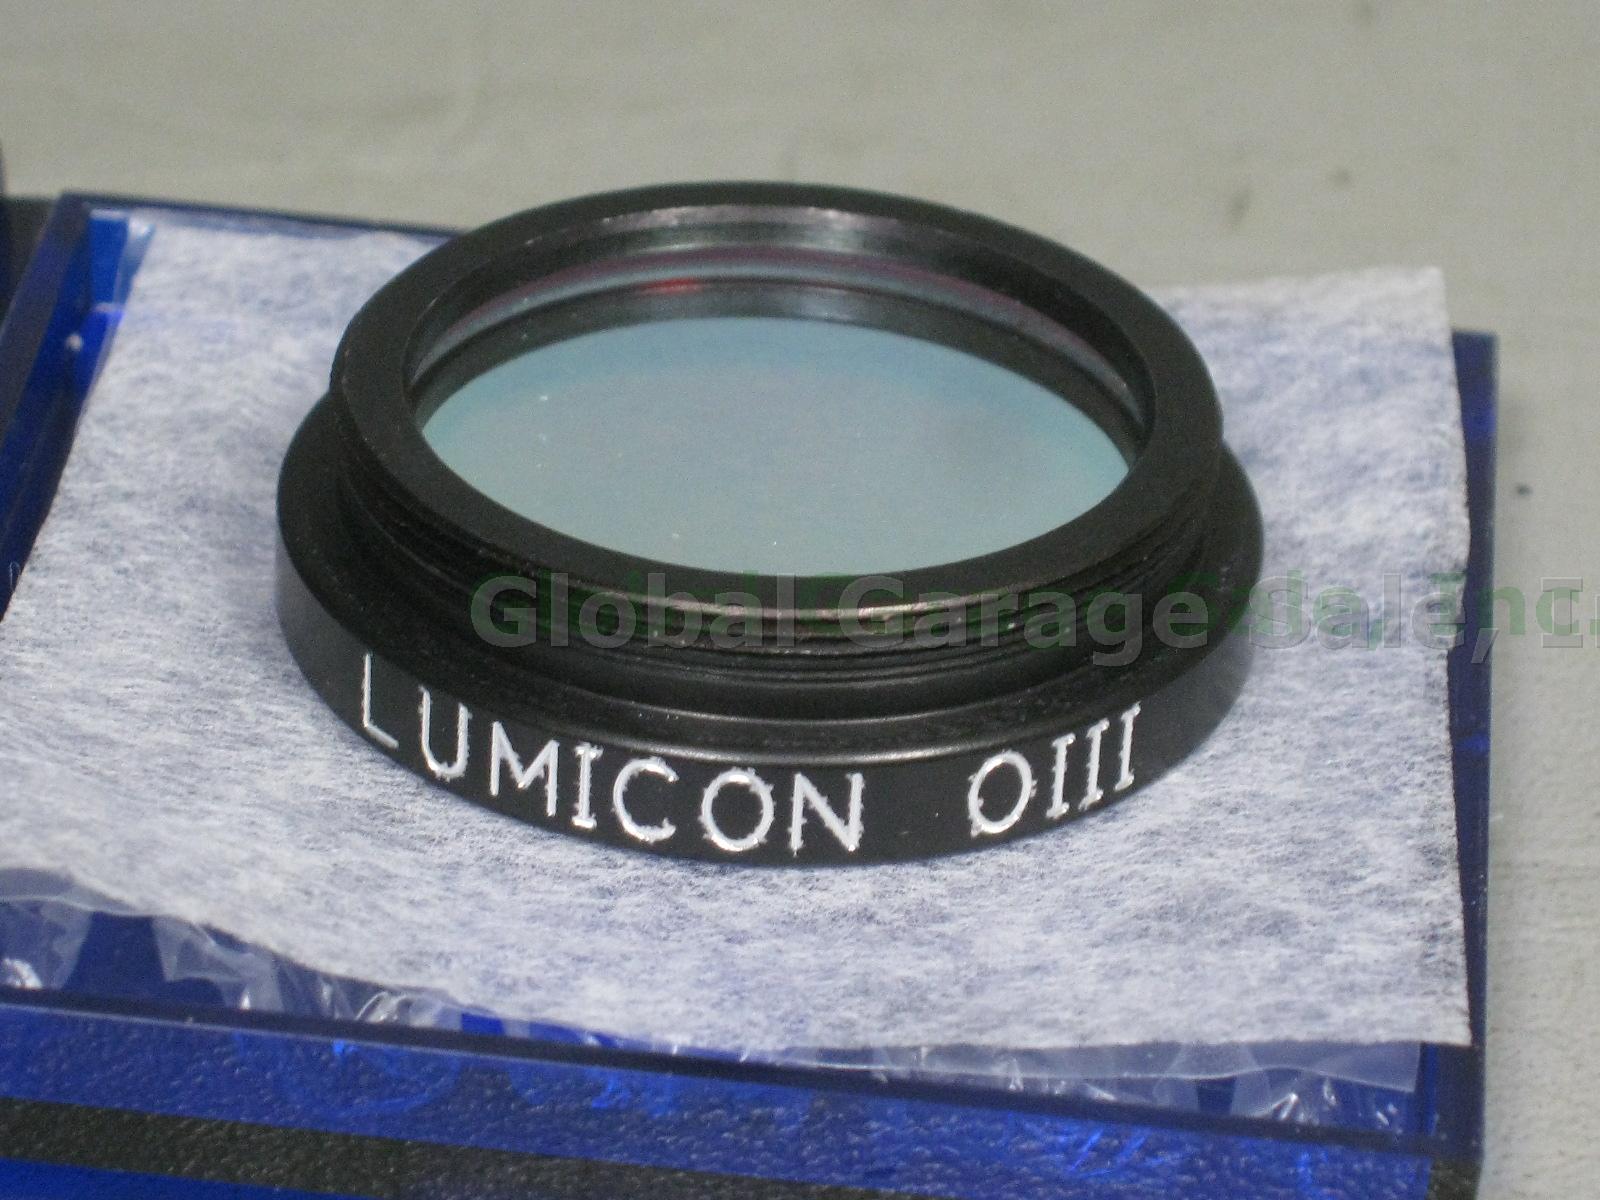 Never Used! Lumicon 1.25" Oxygen-III Telescope Filter For Faint Nebulae No Res! 1